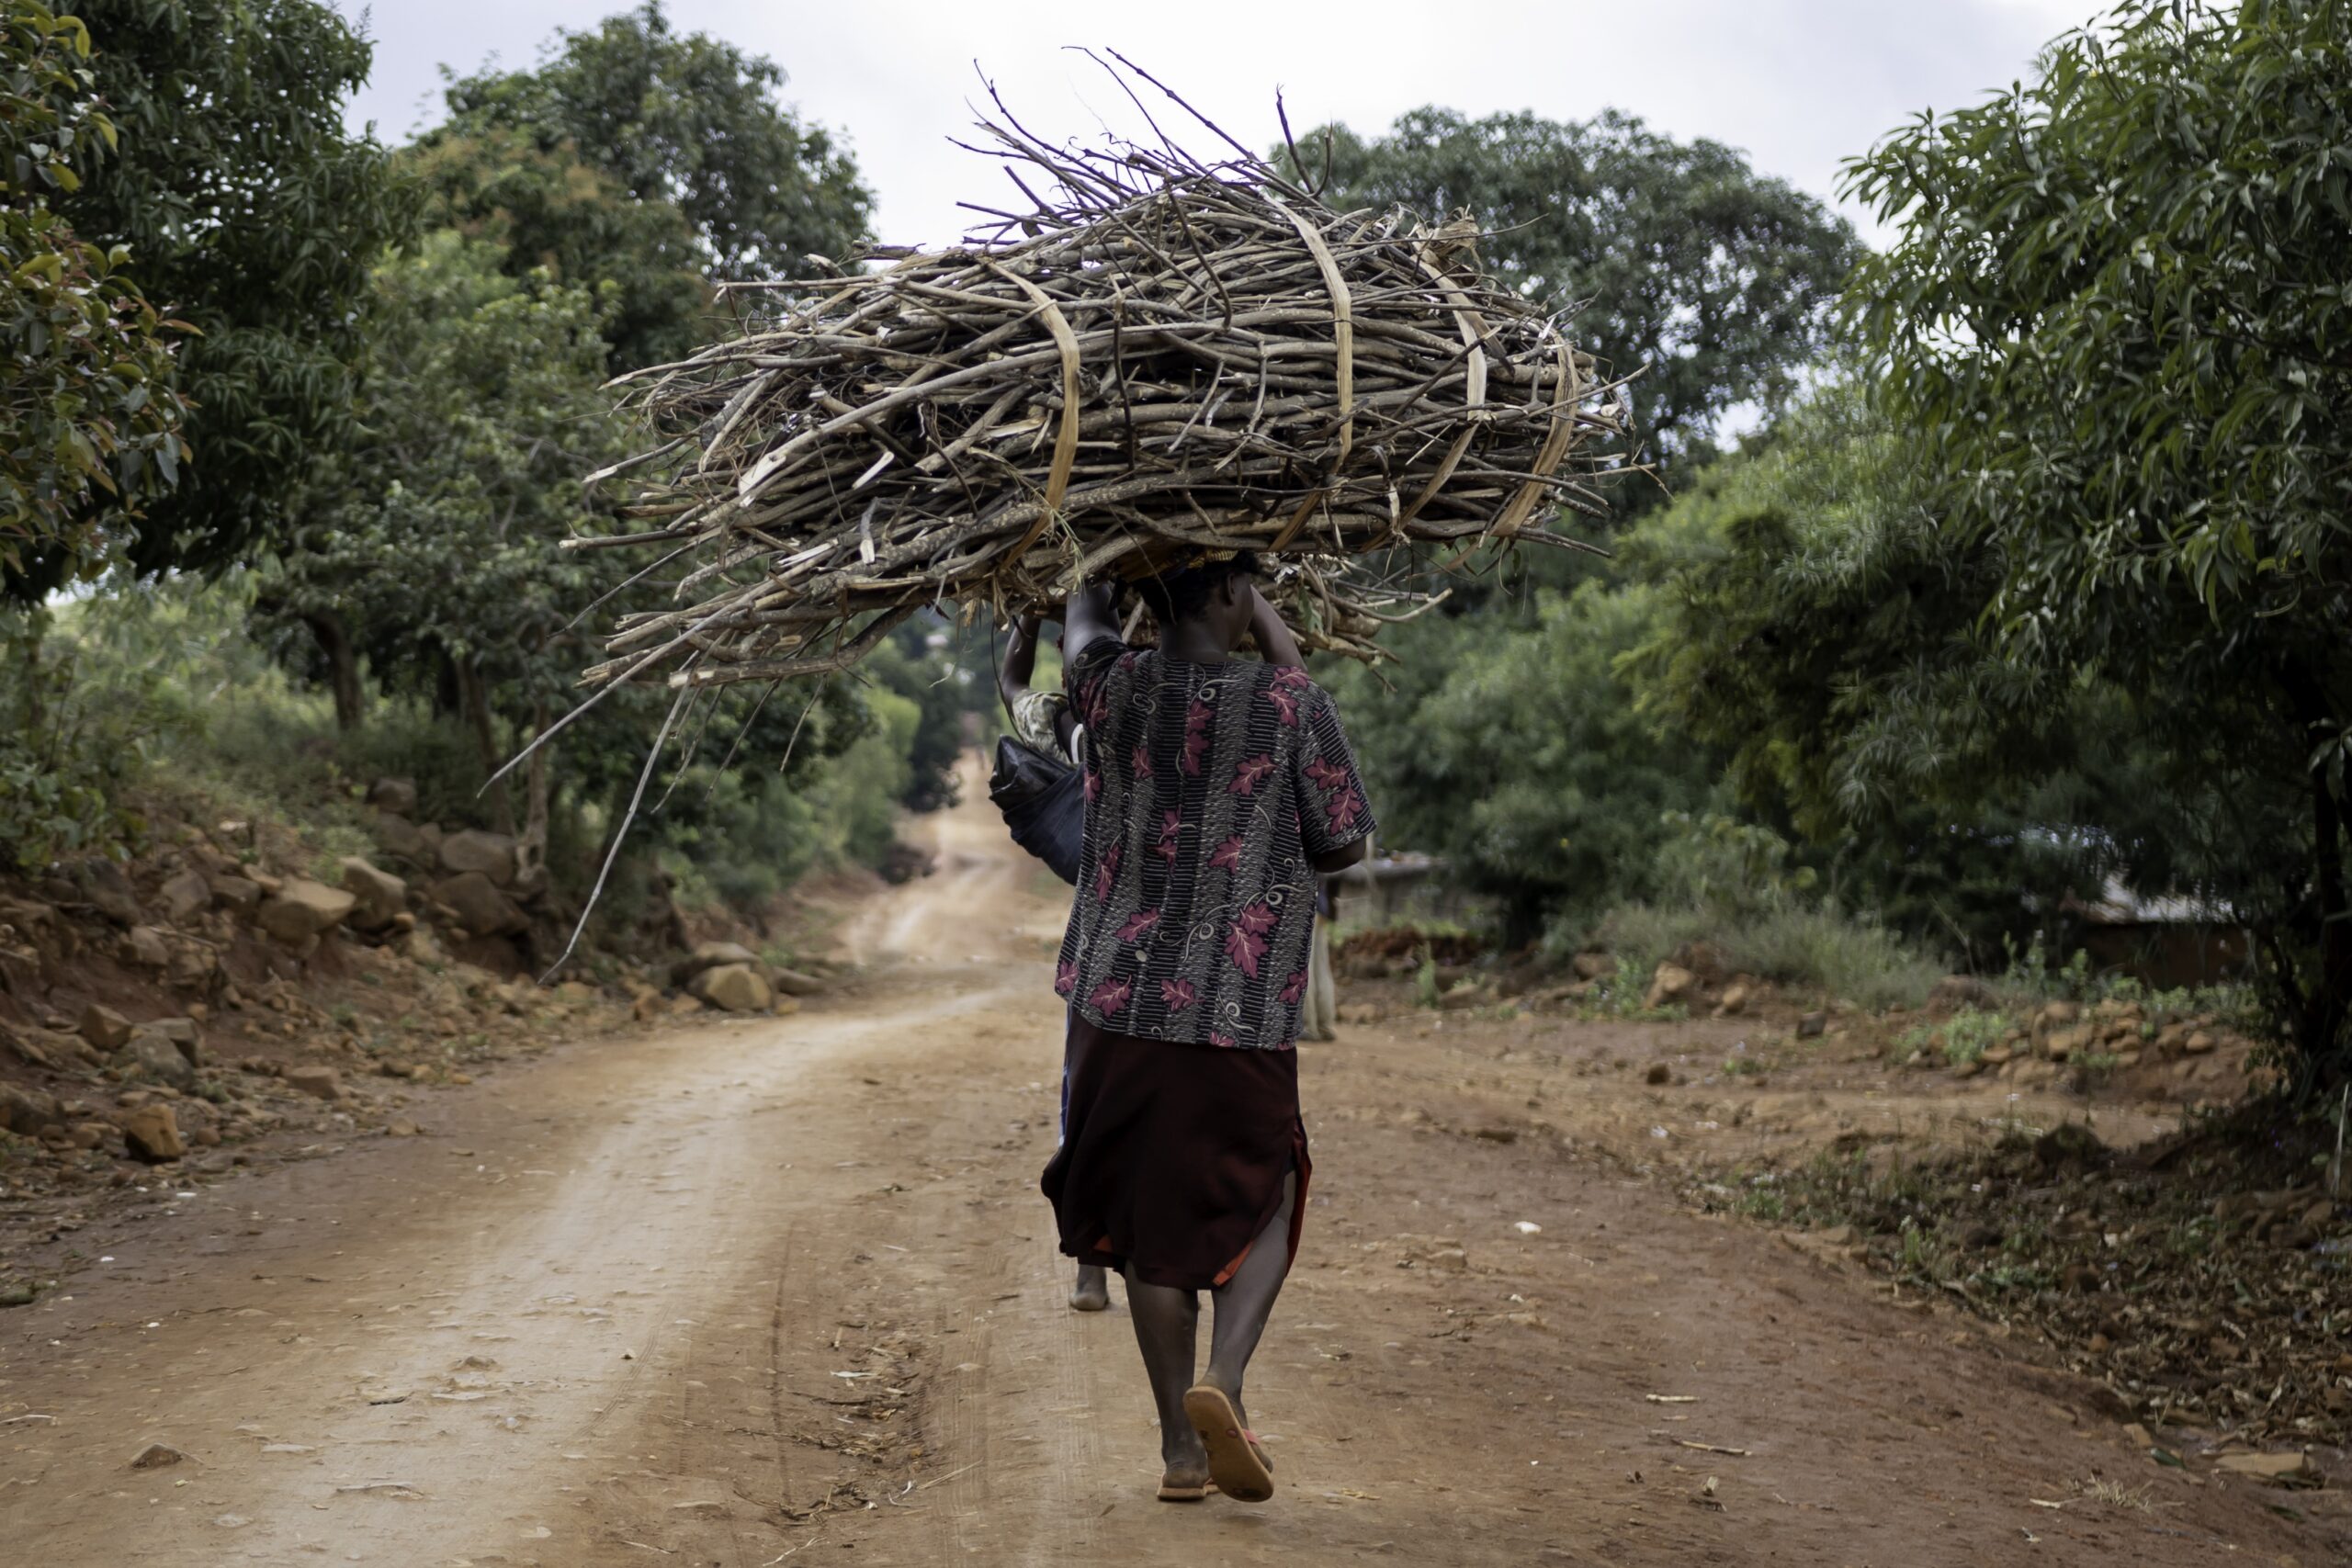 A woman walking away from the camera balancing a load of branches on her head